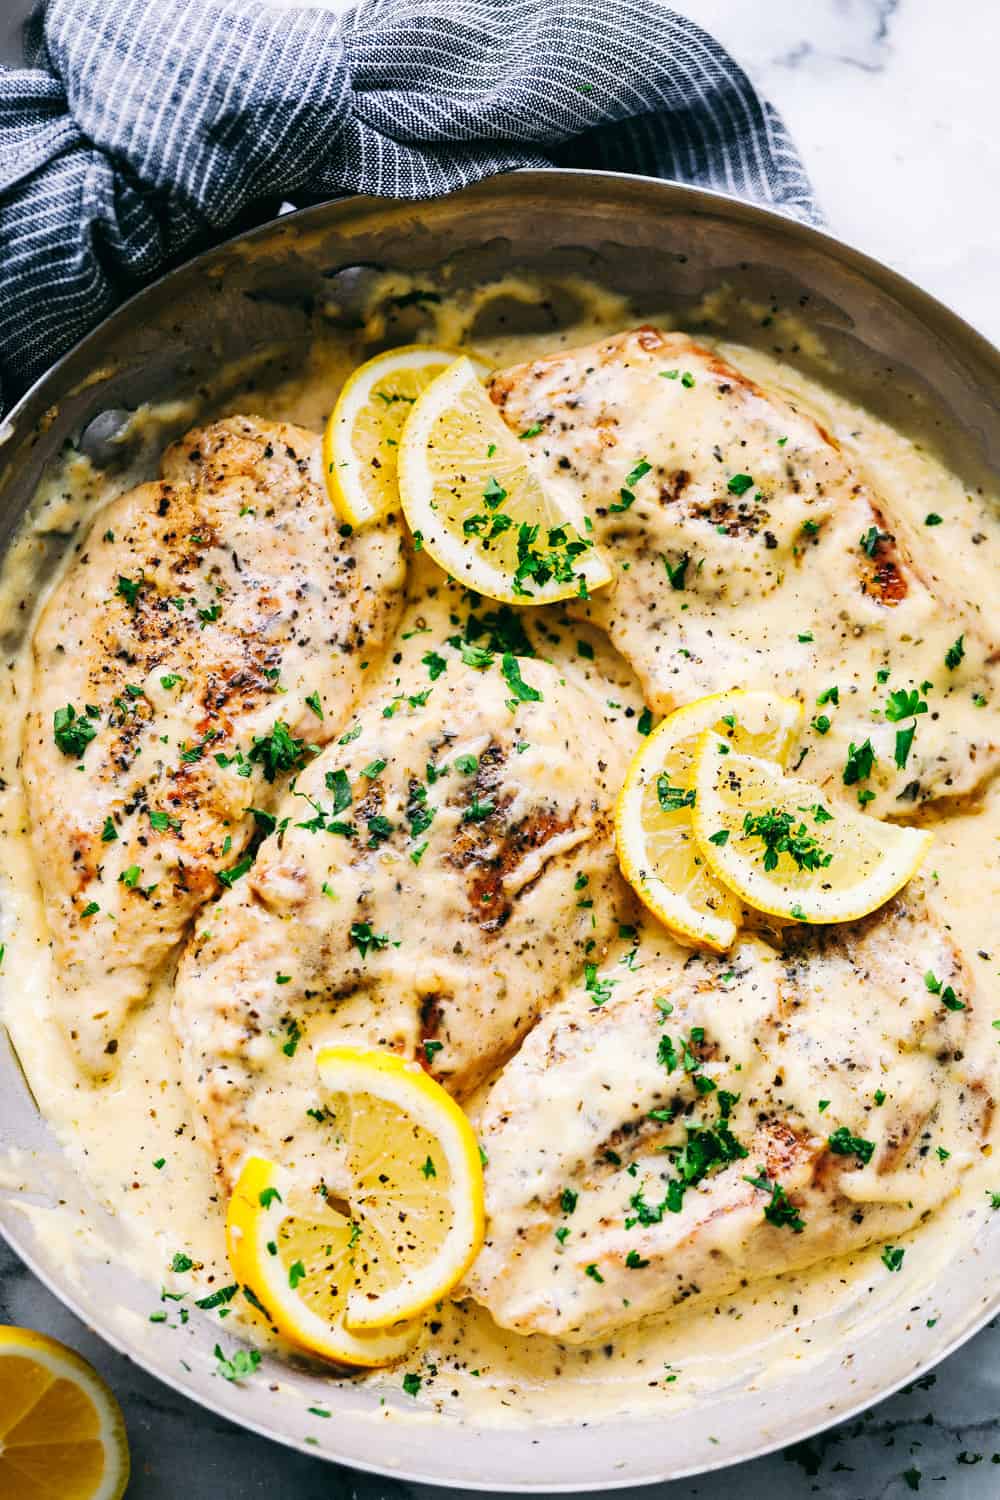 Creamy Lemon Parmesan Chicken The Recipe Critic,Wall Art Sayings For Bedroom